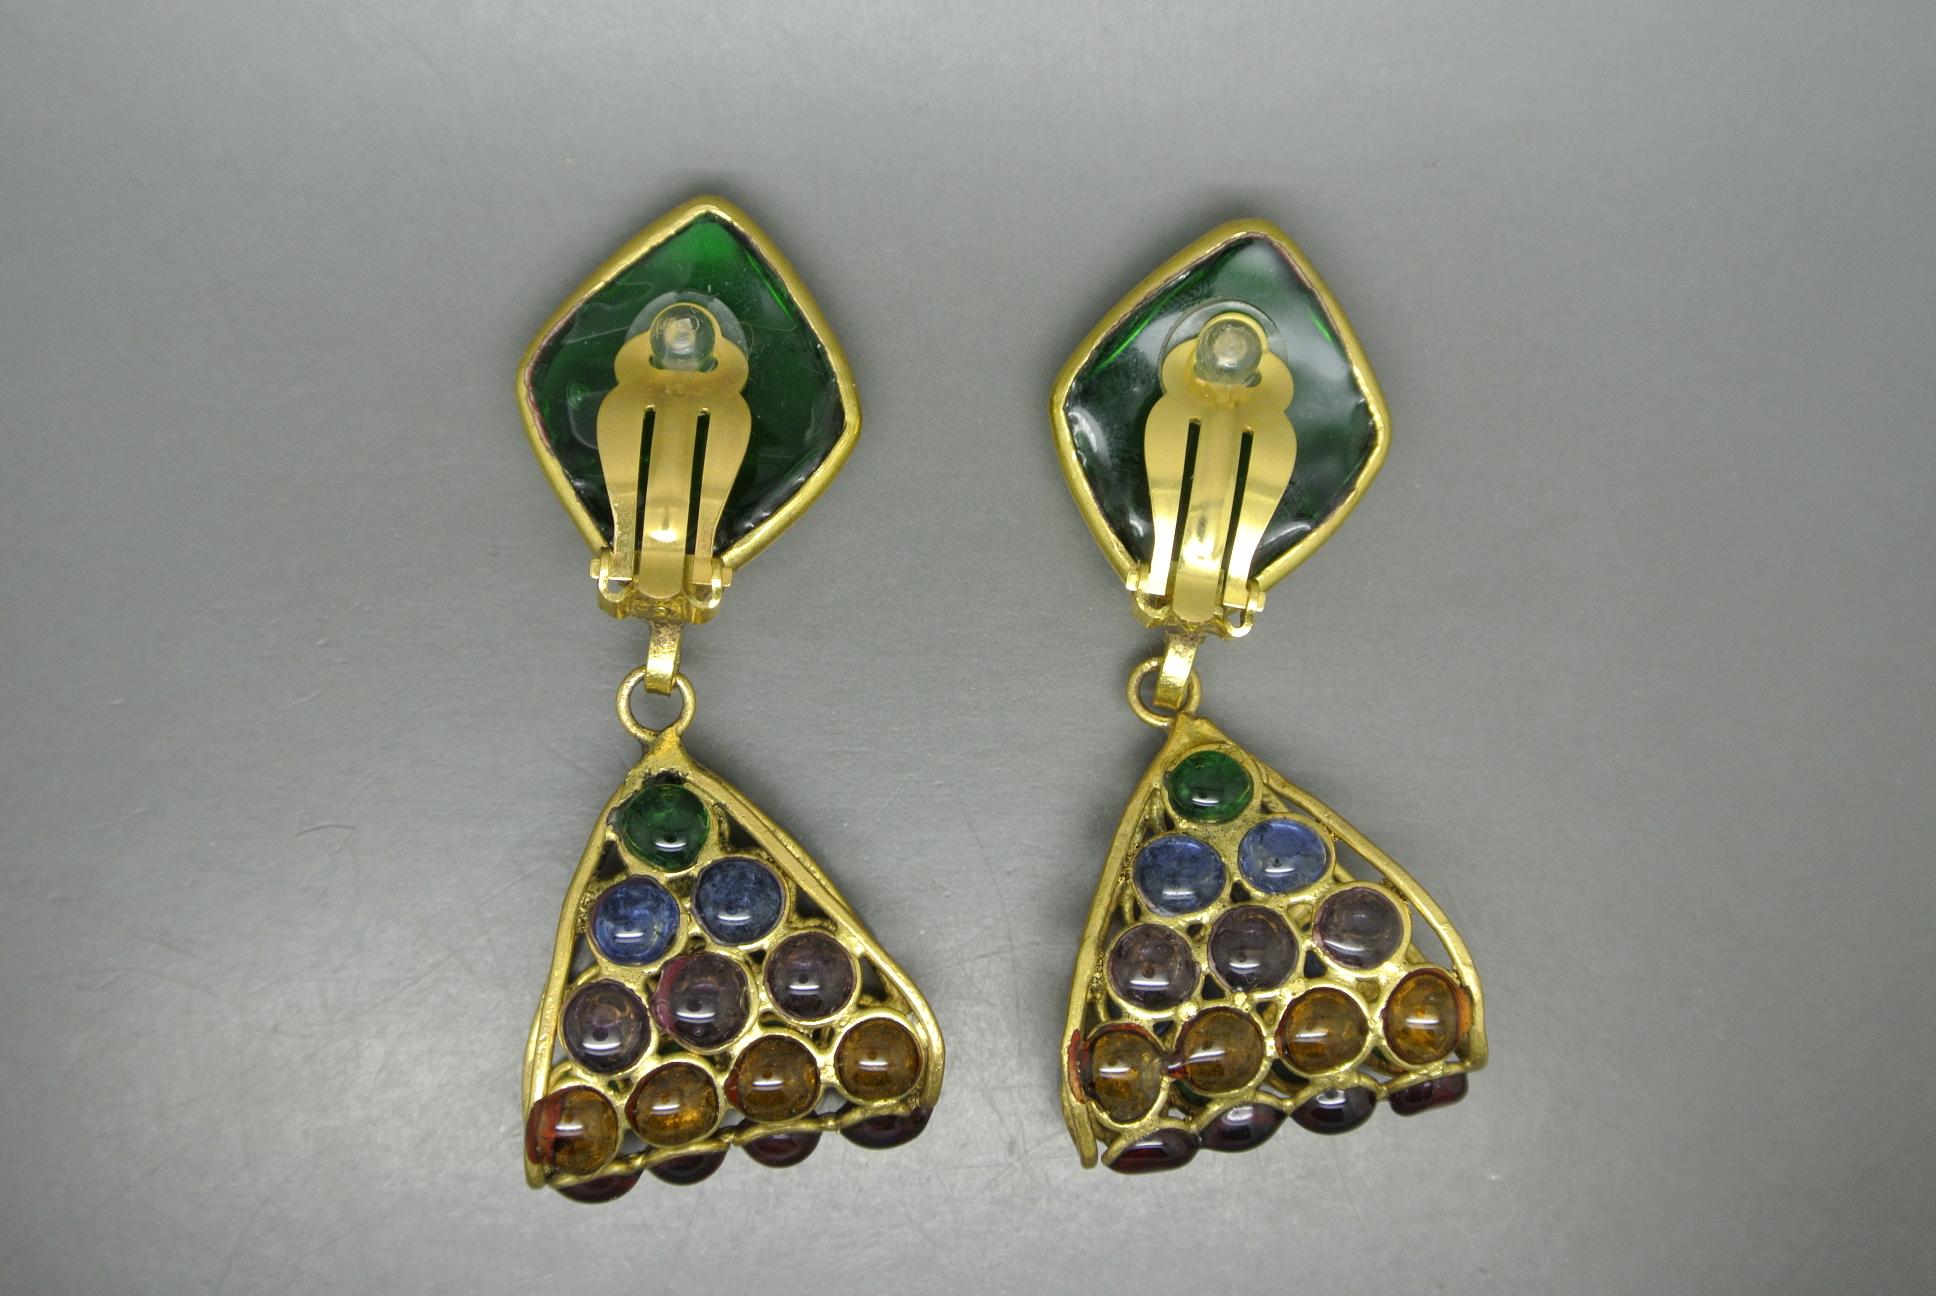 Couture earrings
Made in france originally
by Gripoix
detailed work look like high-end designer piece
not signed